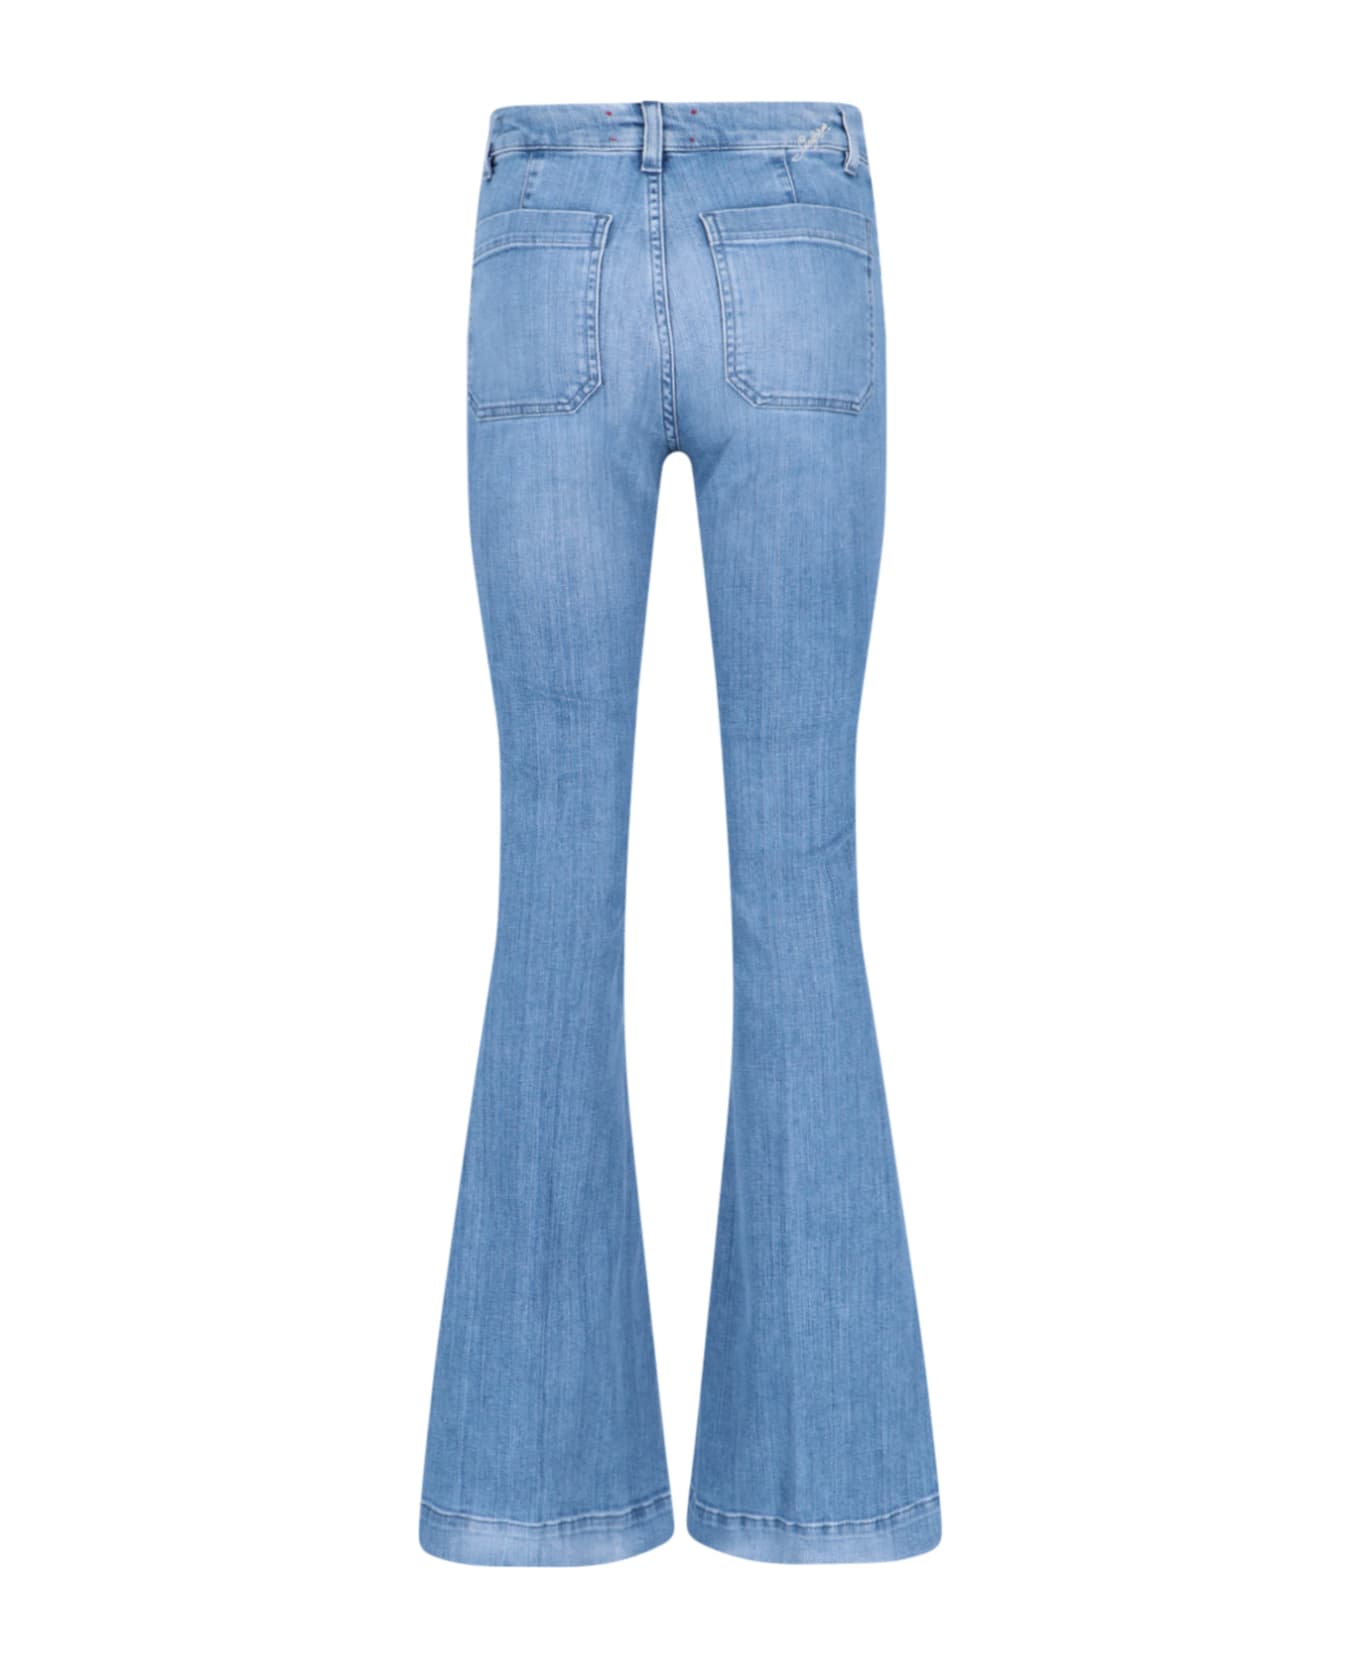 The Seafarer Jeans Bootcut - Blue デニム